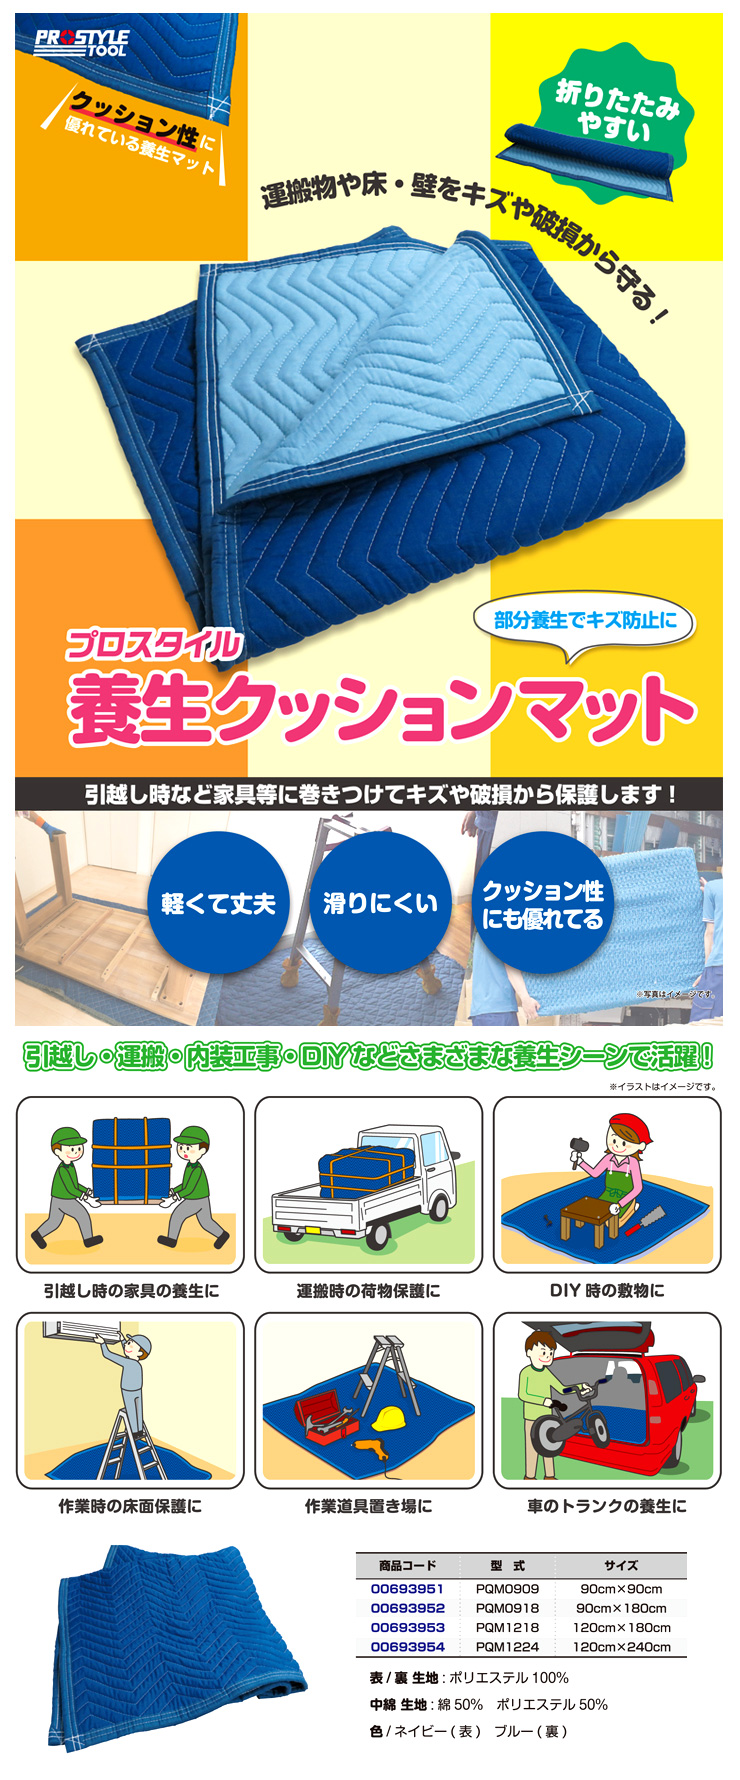 PMM0909 養生クッションマット フローバル - 安全・保護用品